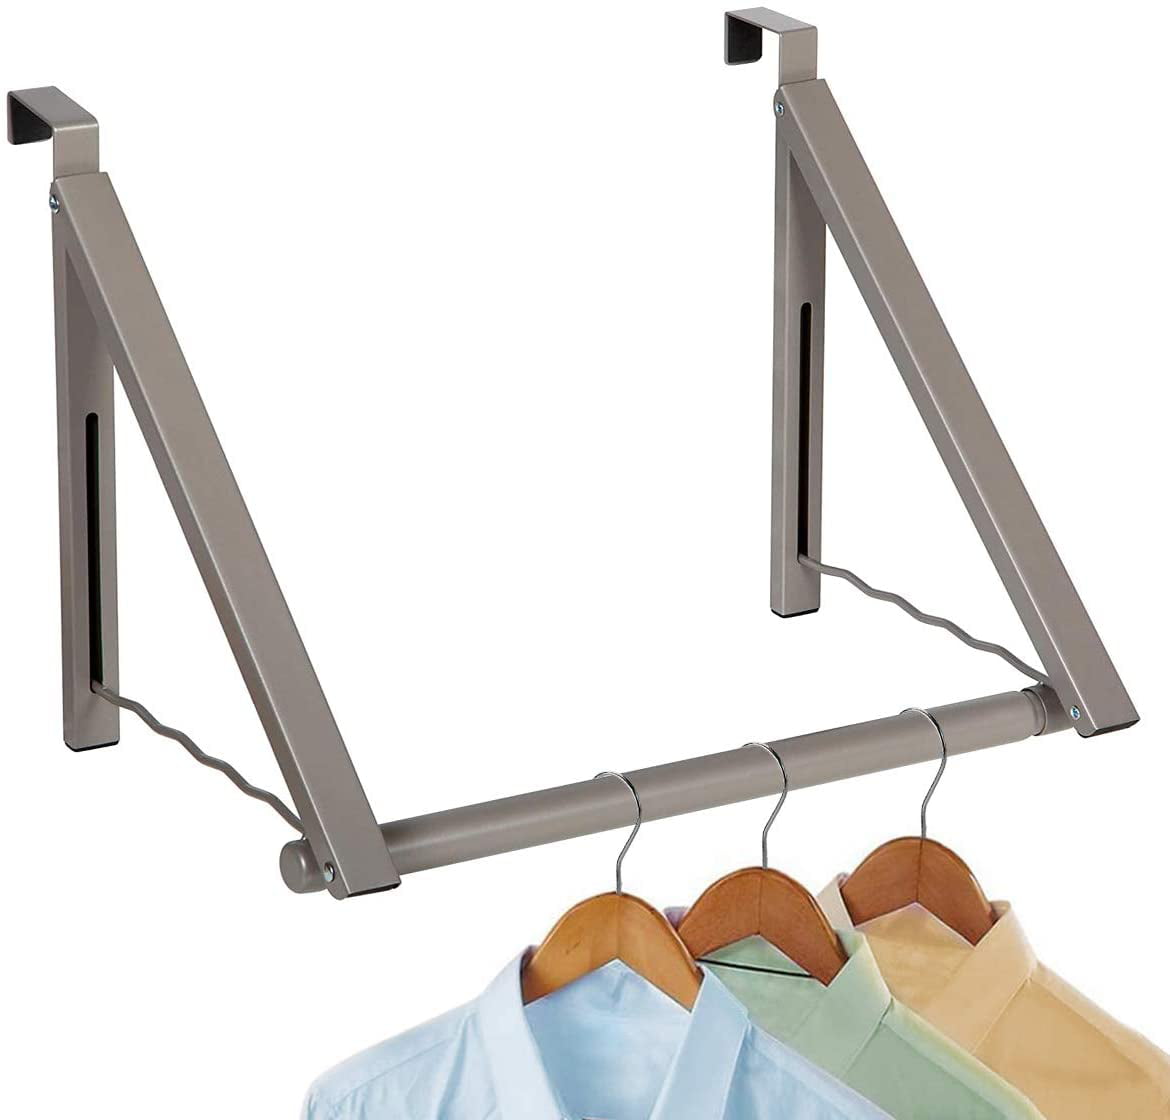 Organizing Closets etc Perfect to Use for Drying Clothes Over Door Hanger-Heavy Duty Clothes Rack- Expandable/Foldable Closet Rod Clothes Valet in Bathrooms/Bedrooms Storage White 